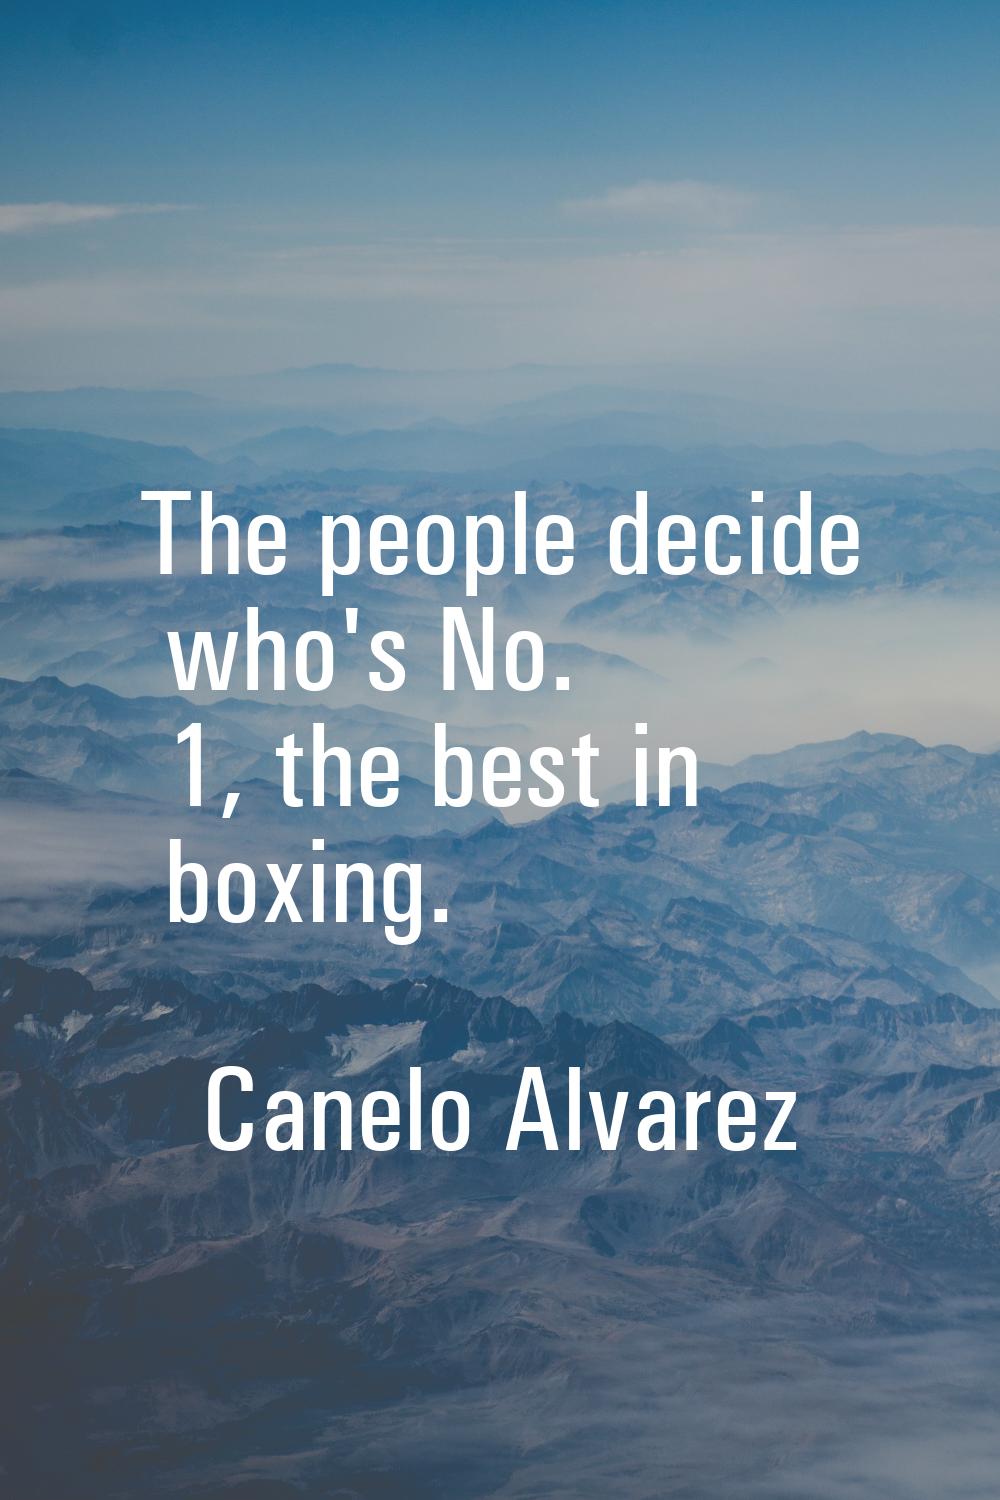 The people decide who's No. 1, the best in boxing.